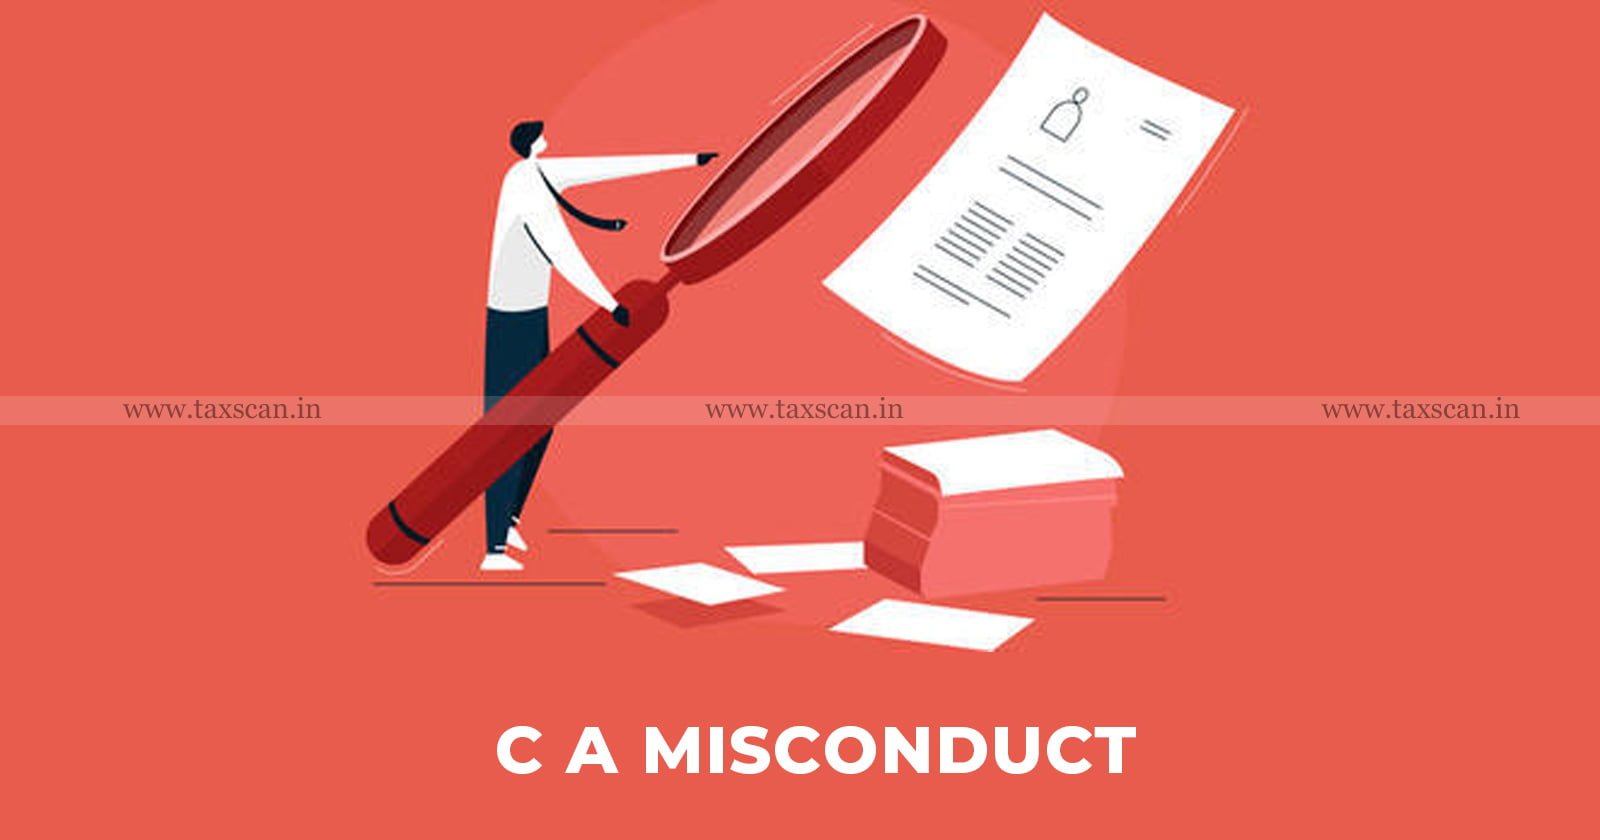 CA Misconduct - ICAI - CA - reckless Certification - Filing of Form 23AC - Form 23AC - taxscan